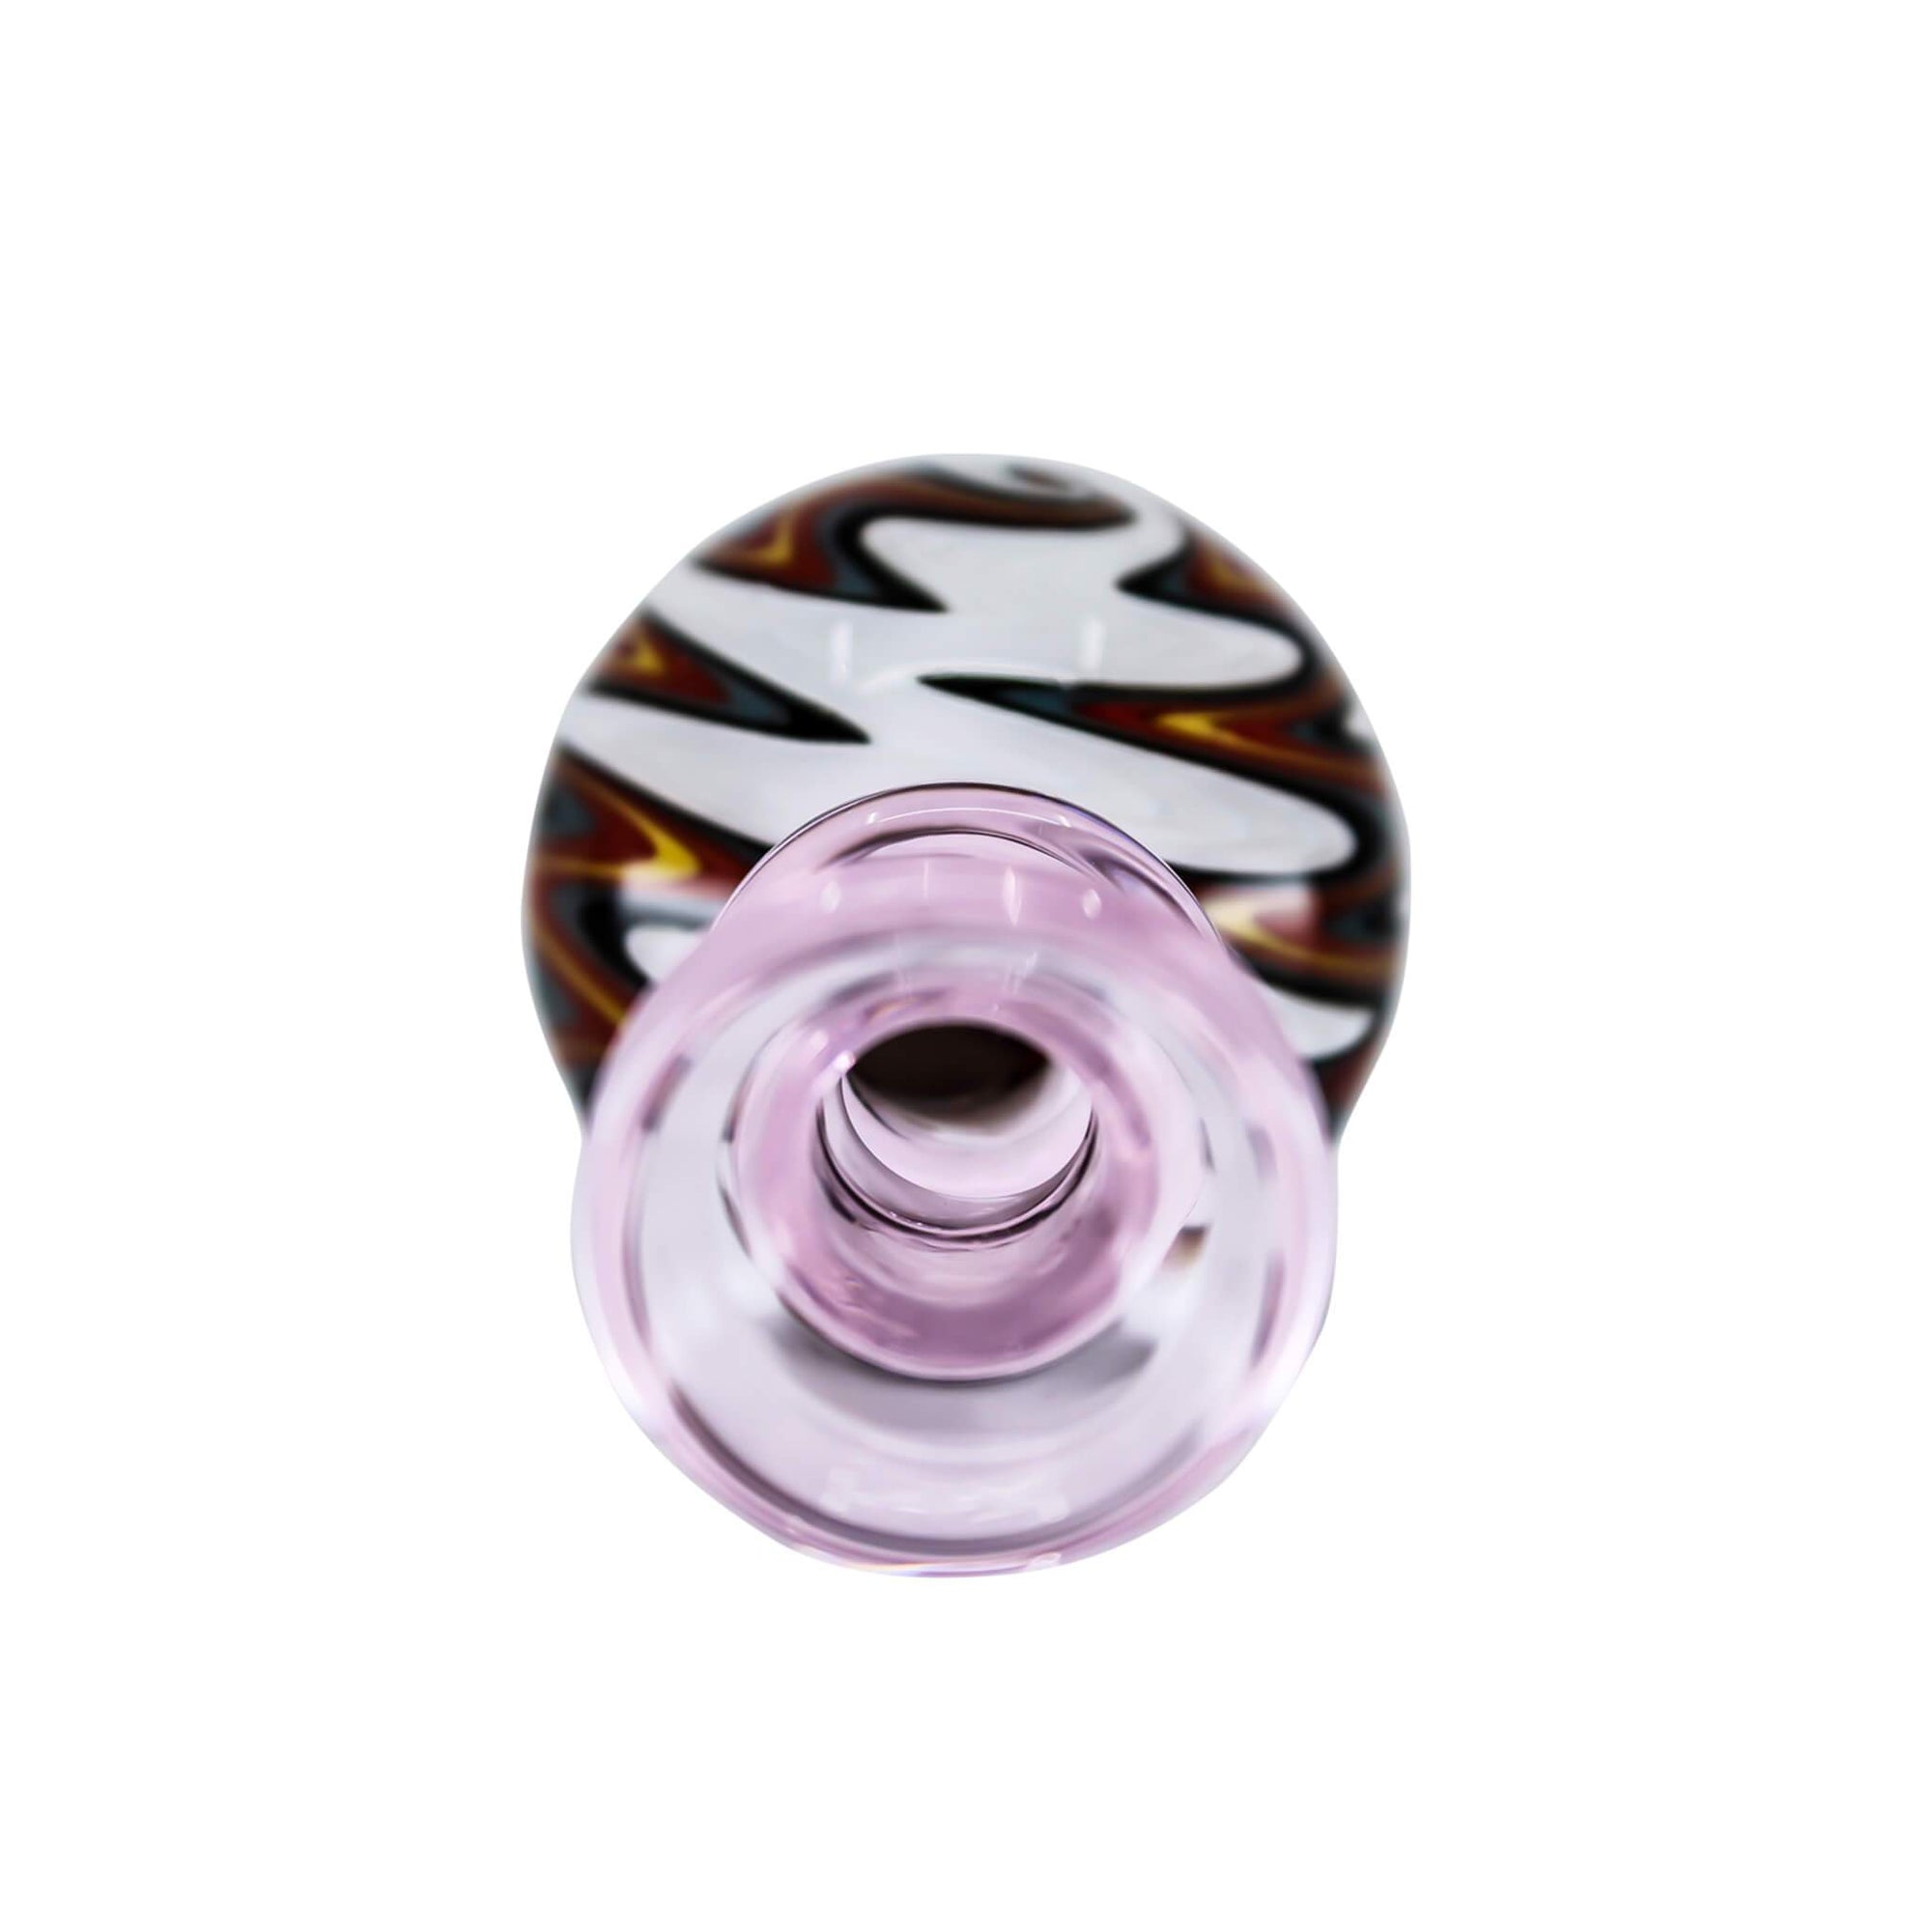 Big-Bore Bubble Carb Cap | Top Down View | the dabbing specialists